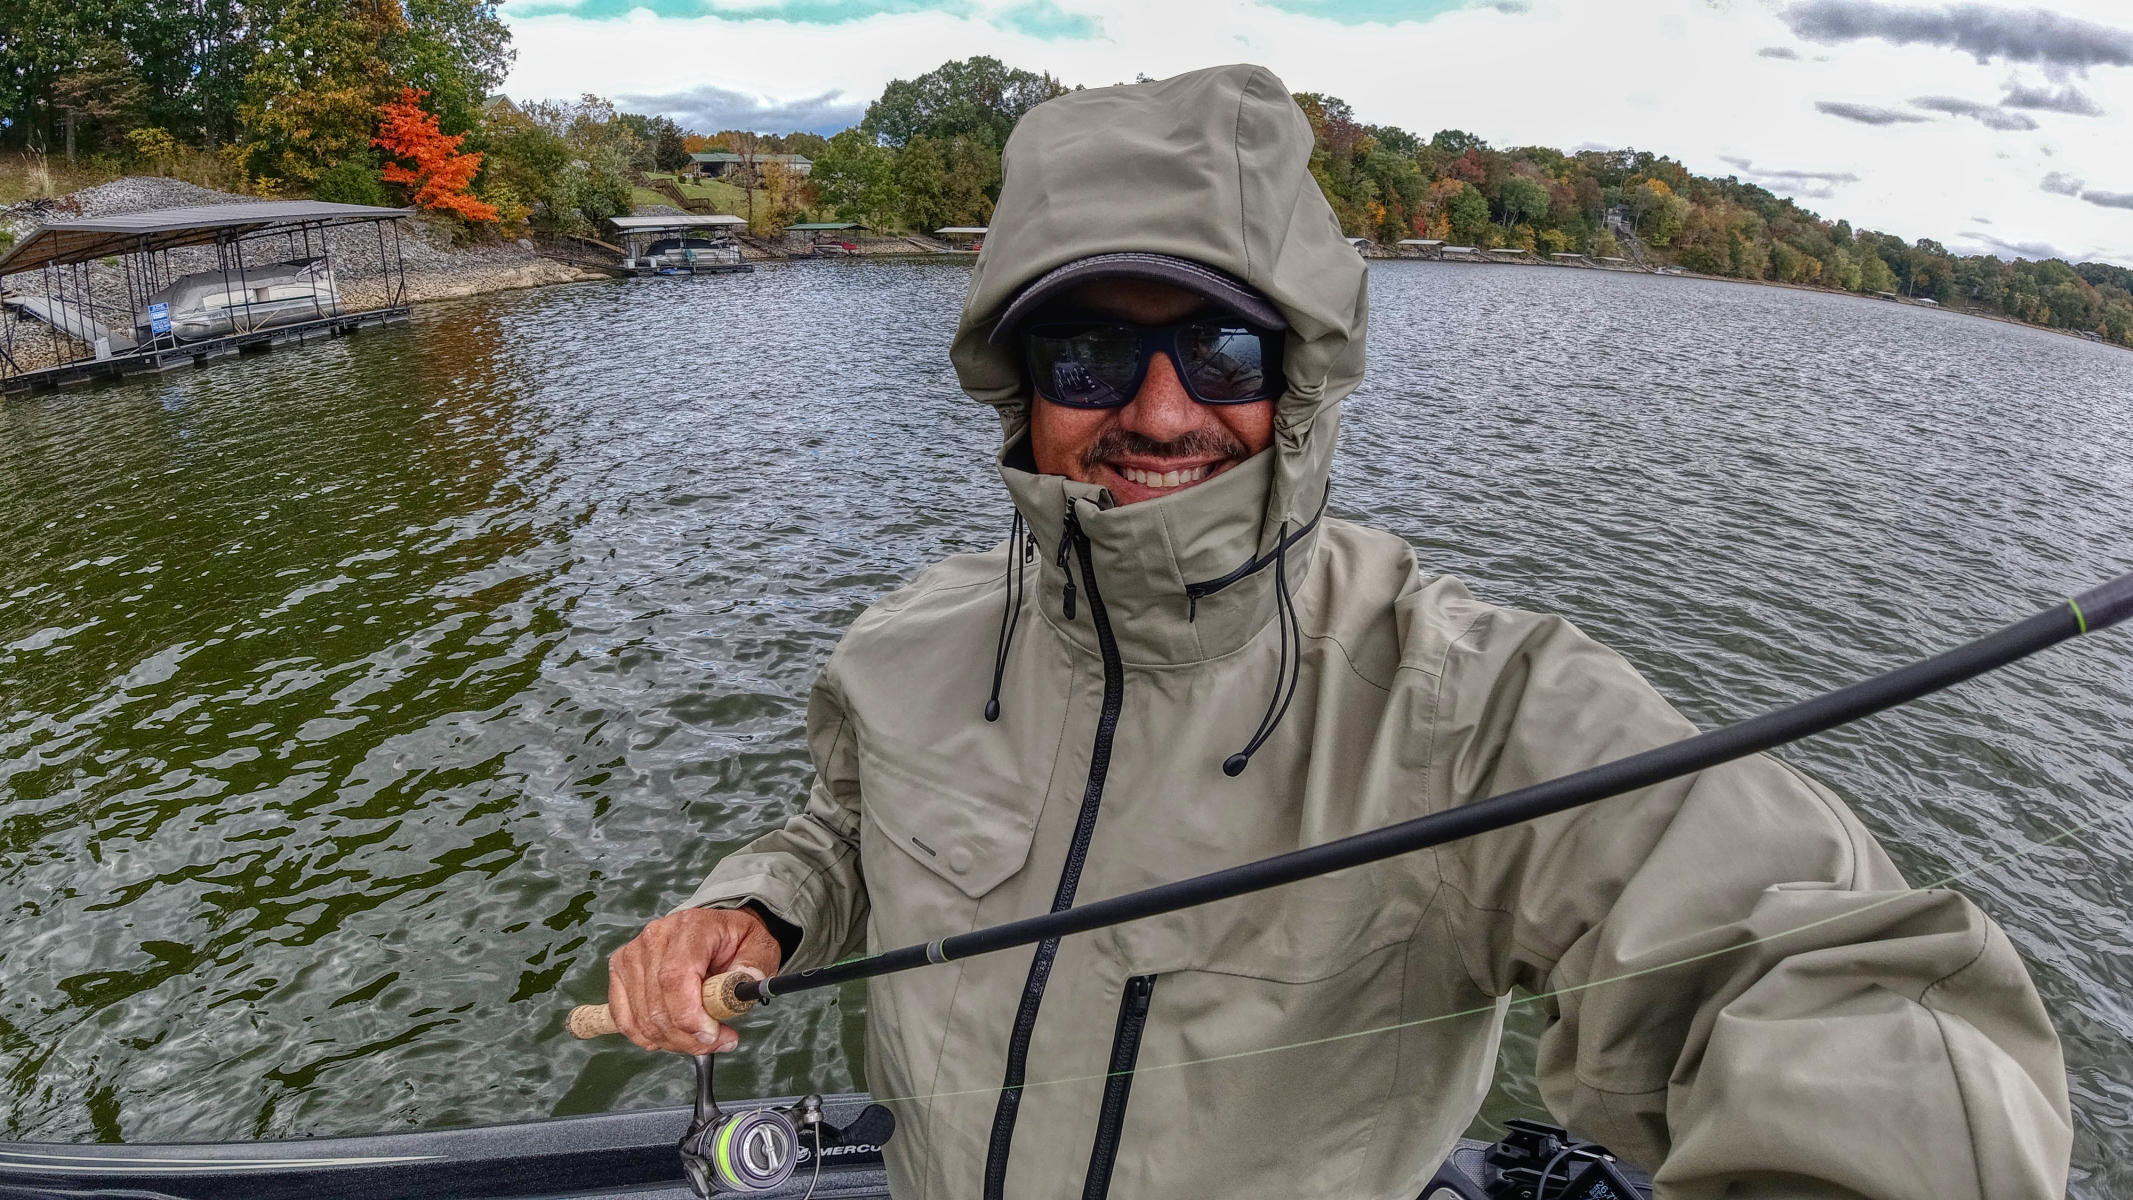 New Rapala Outerwear Keeps Anglers Dry and Comfortable - The Fishing Wire